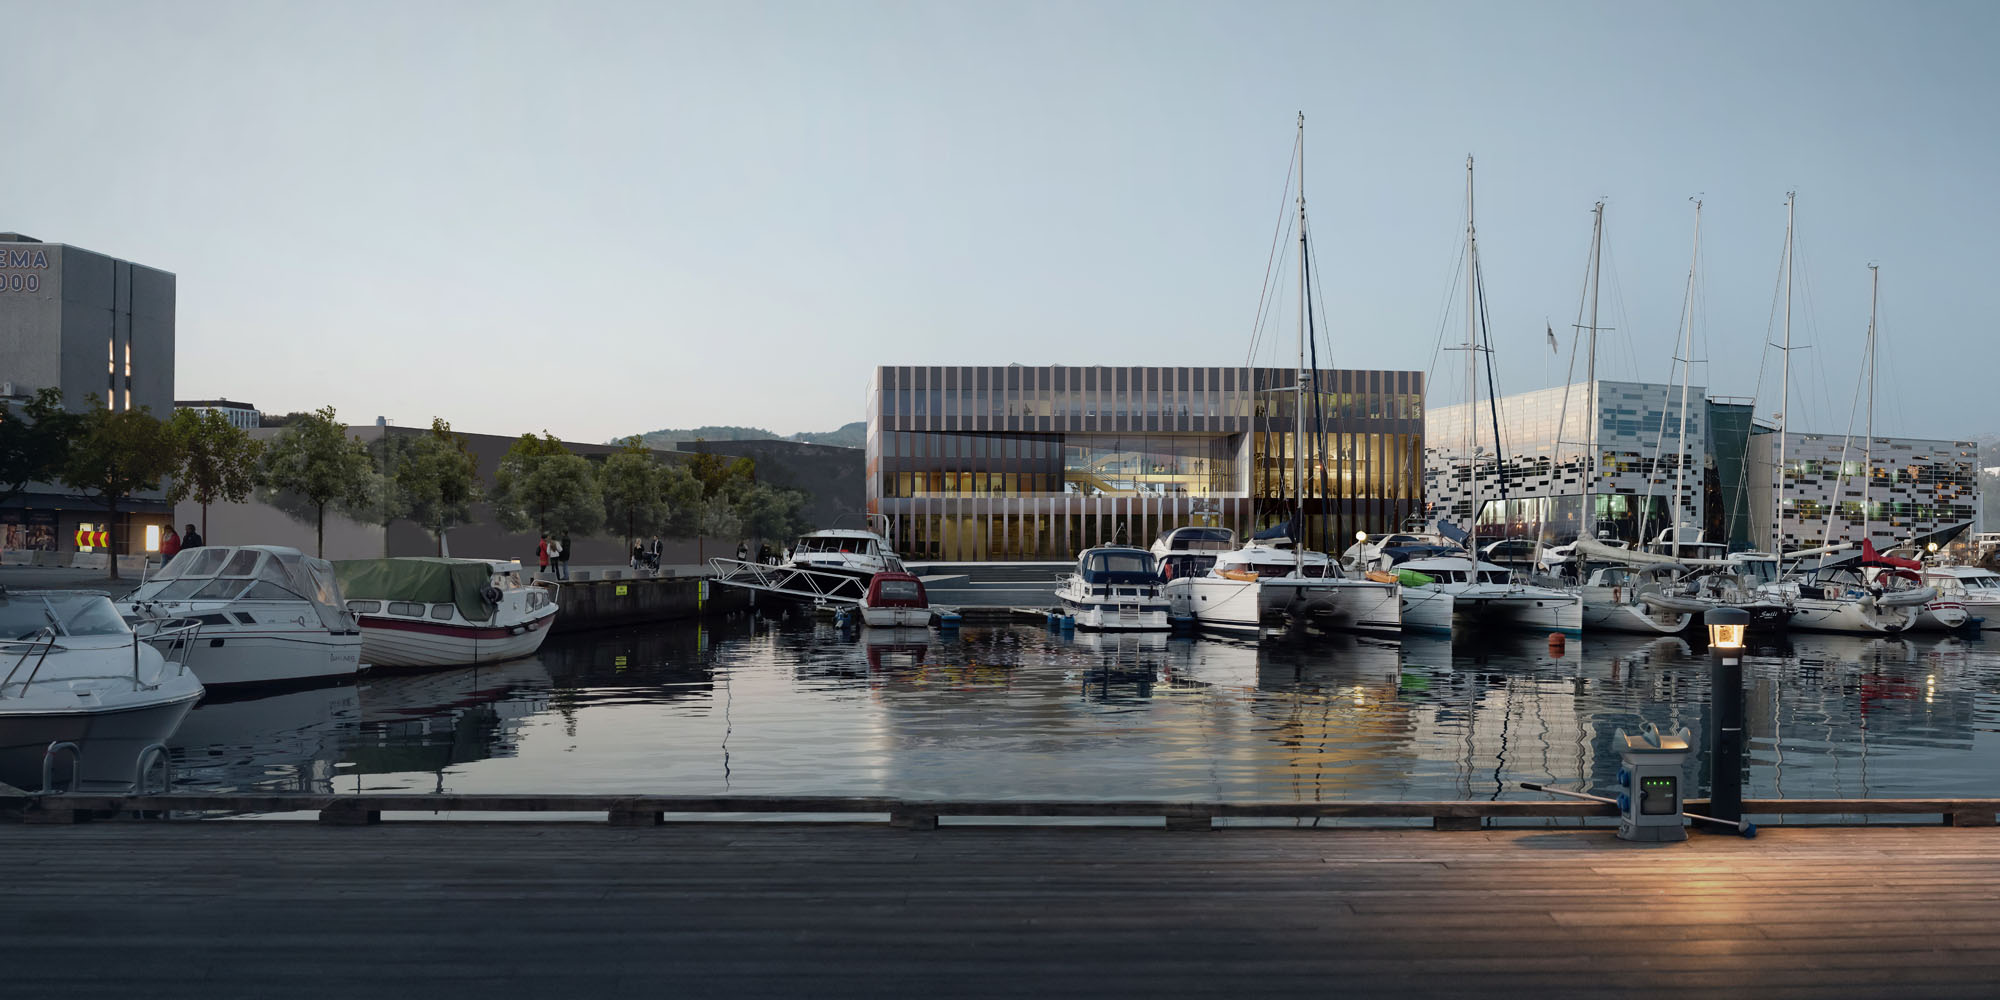 New Town Hall in Sandnes